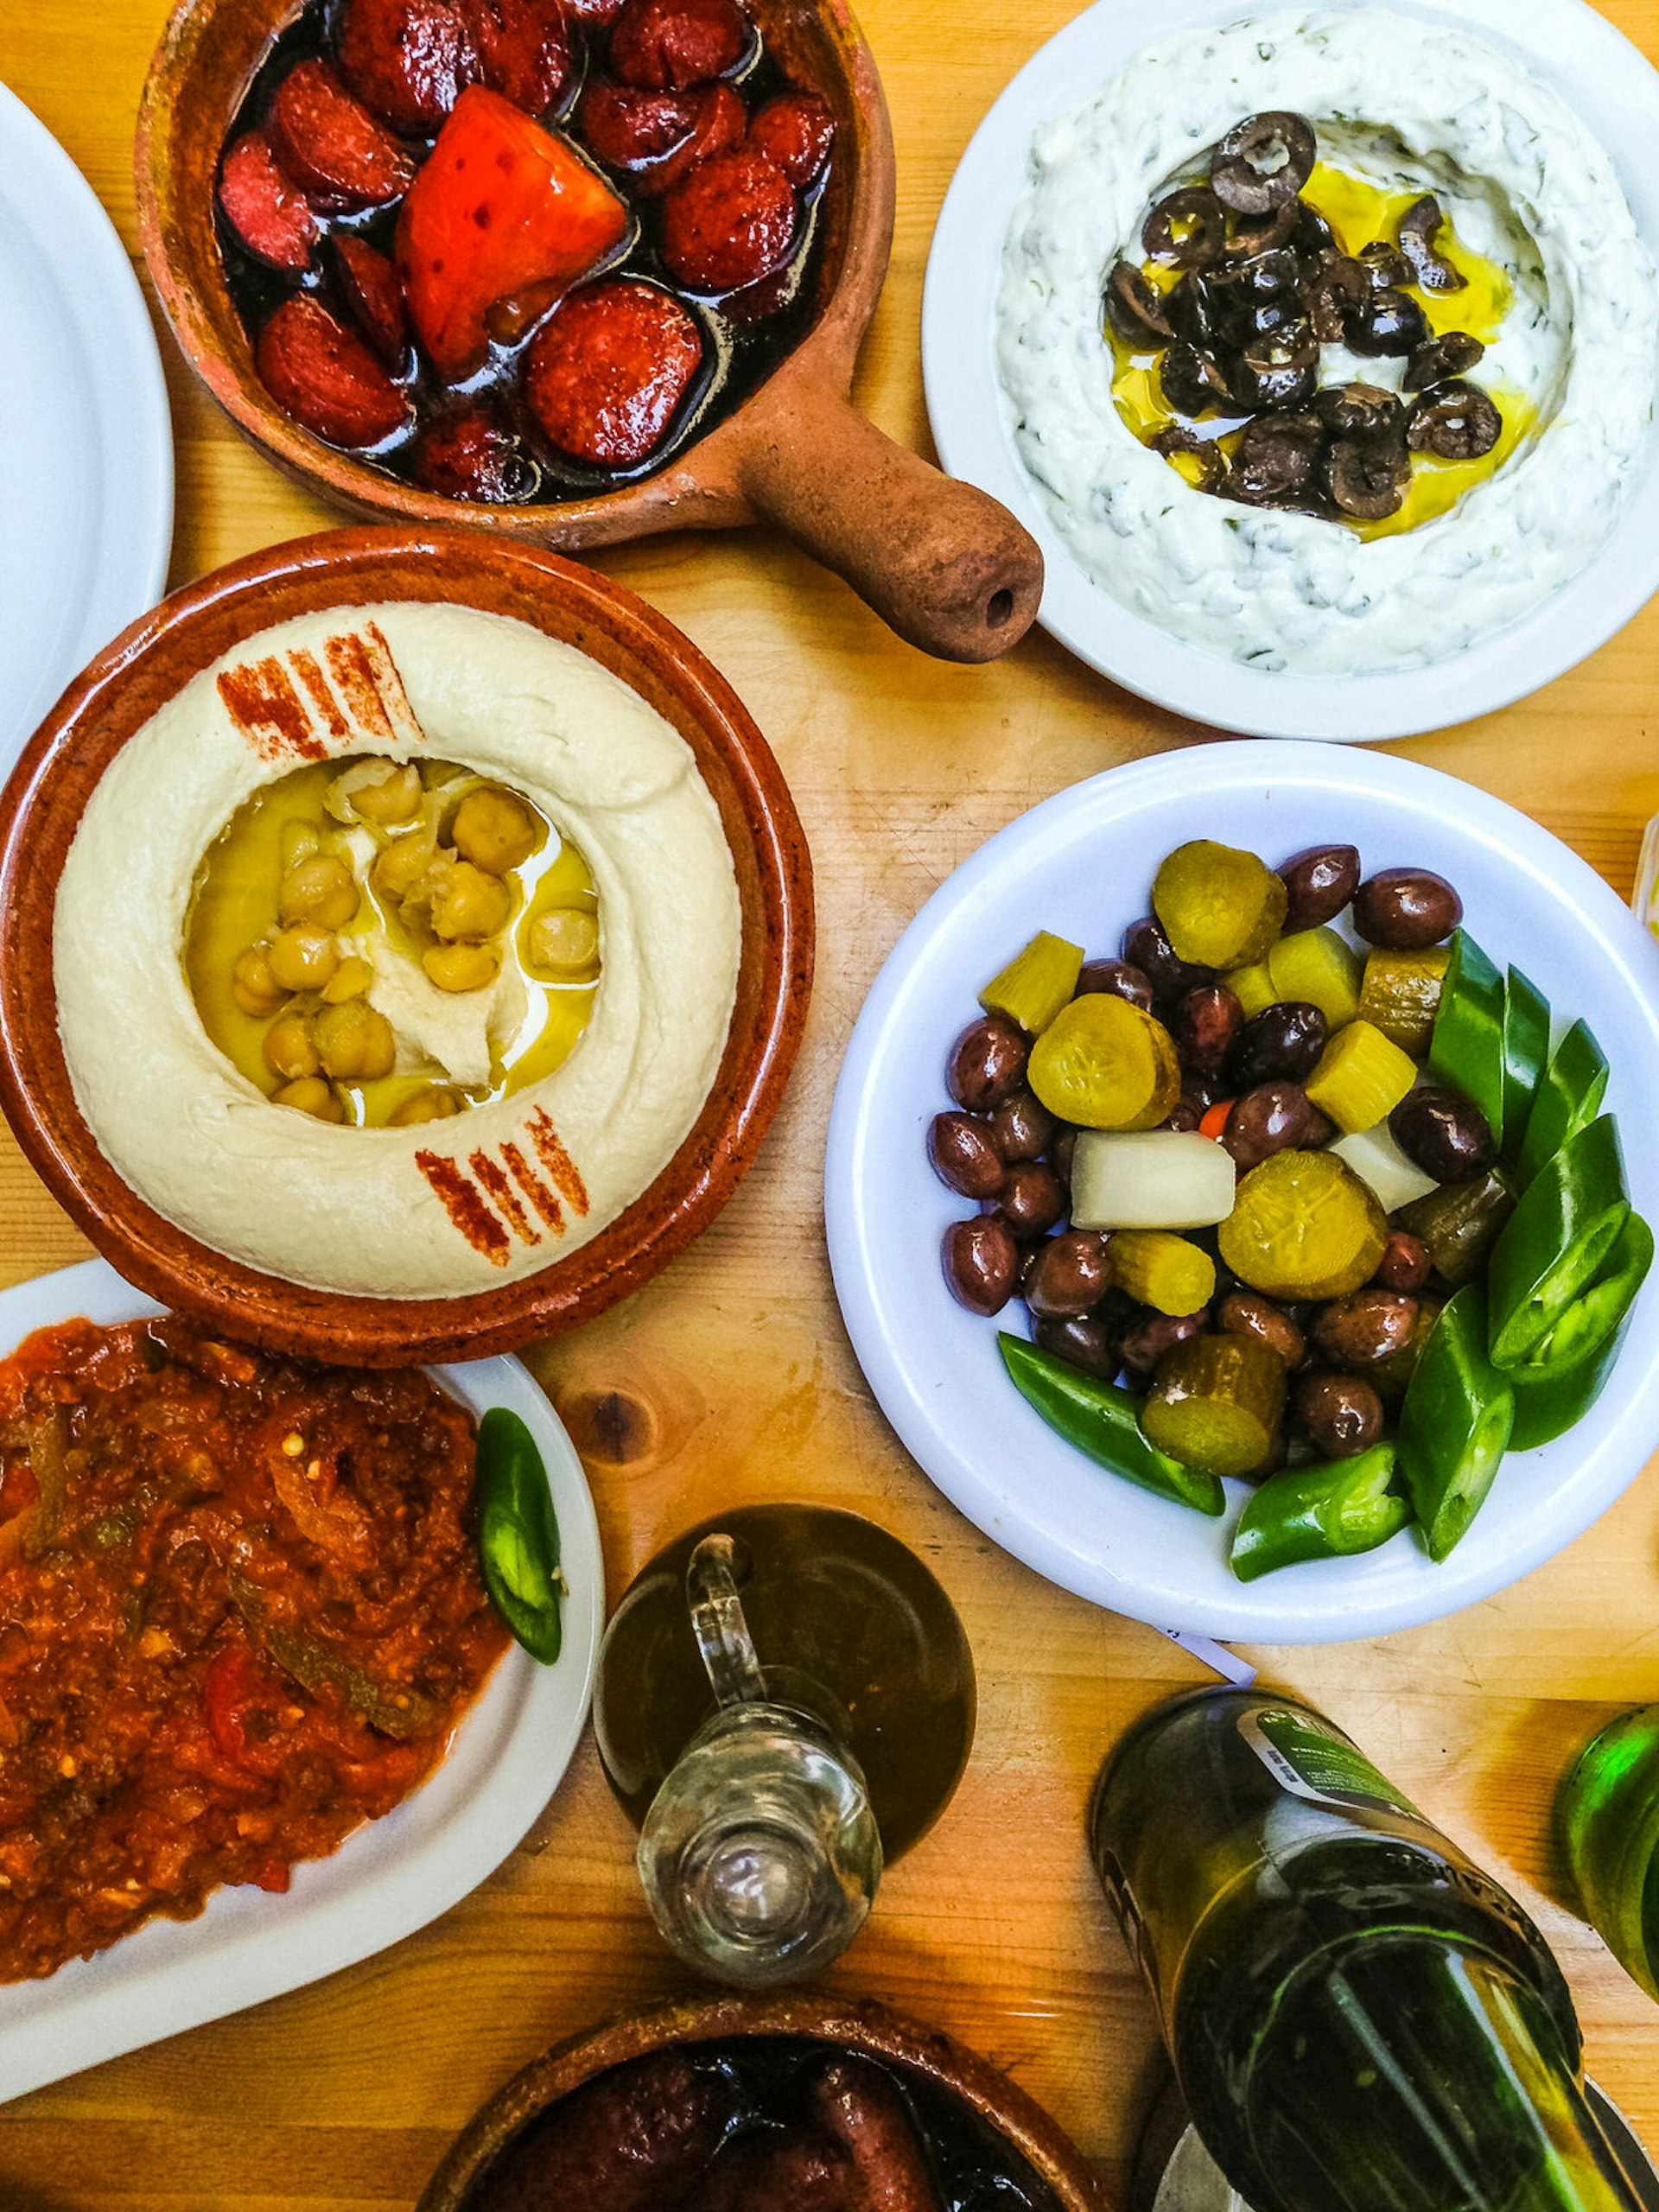 View of hummus and various appetisers served on a wooden table